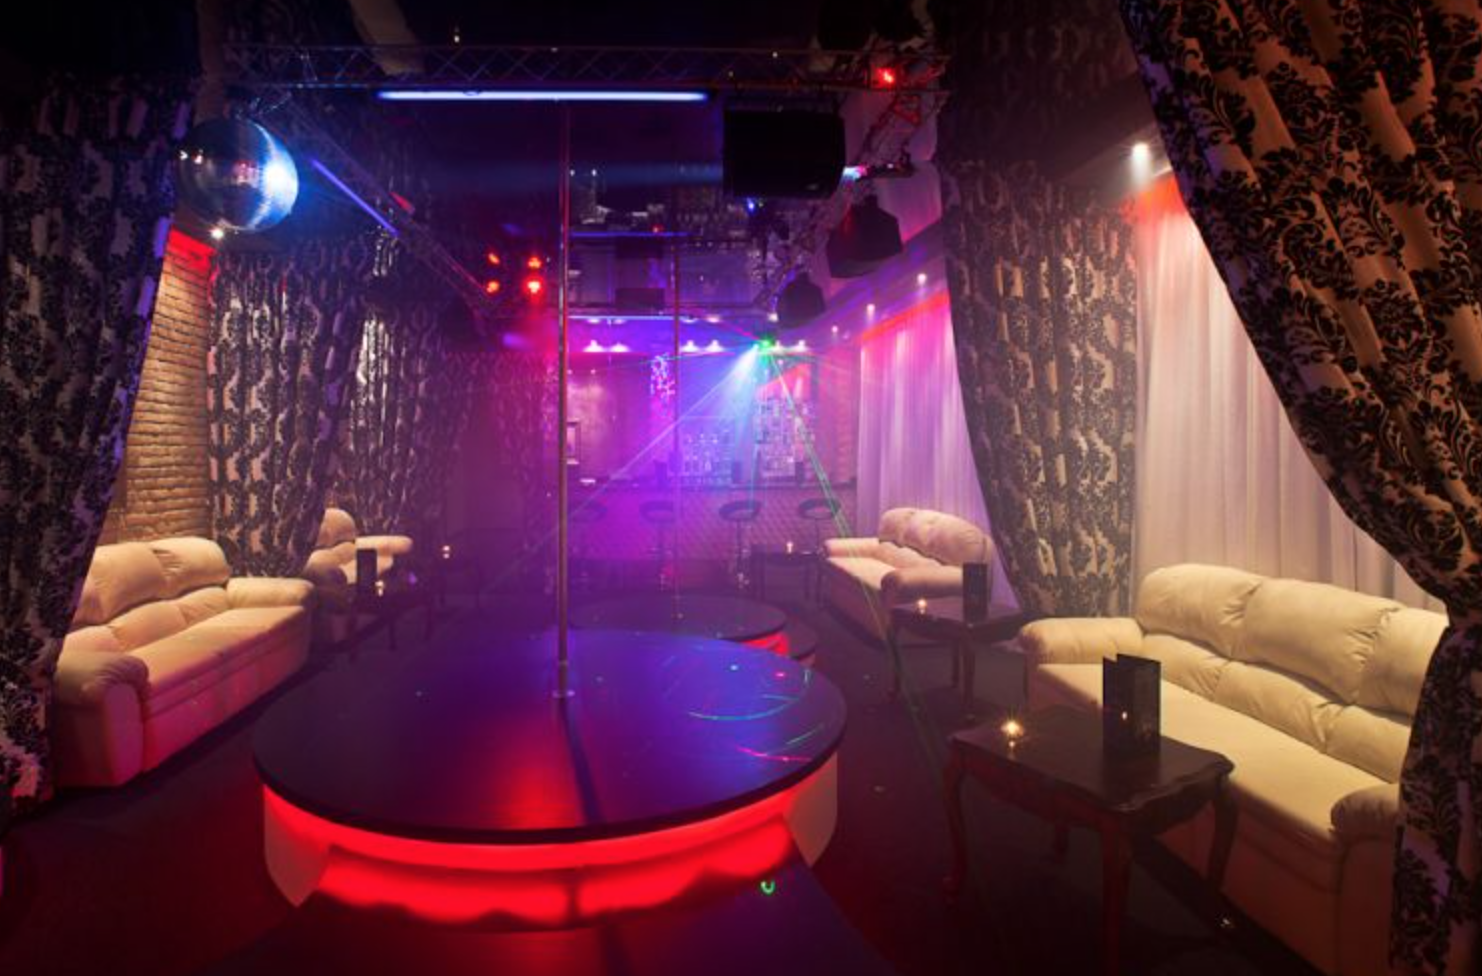 Vilnius striptease clubs, erotic night clubs and erotic city guide